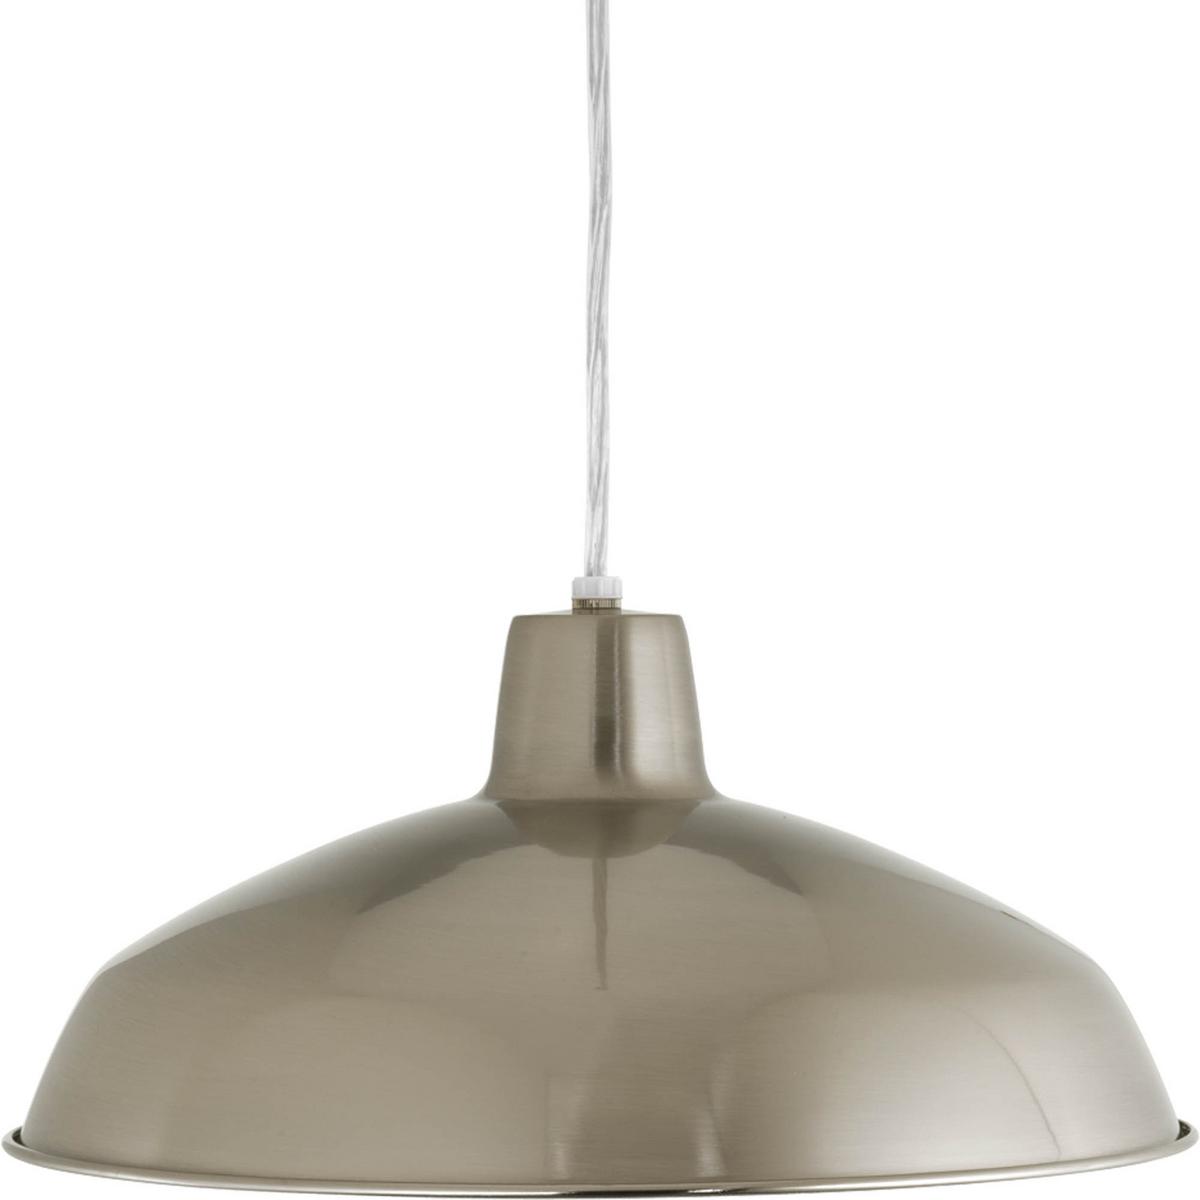 Hubbell P5094-09 One-light industrial style warehouse cord-hung pendant with spun metal shade. Gloss white inside shade for reflectivity. 3 Conductor SVT clear cord.  ; One-light industrial style warehouse cord-hung pendant. ; Spun metal shade. ; Gloss white inside shade 